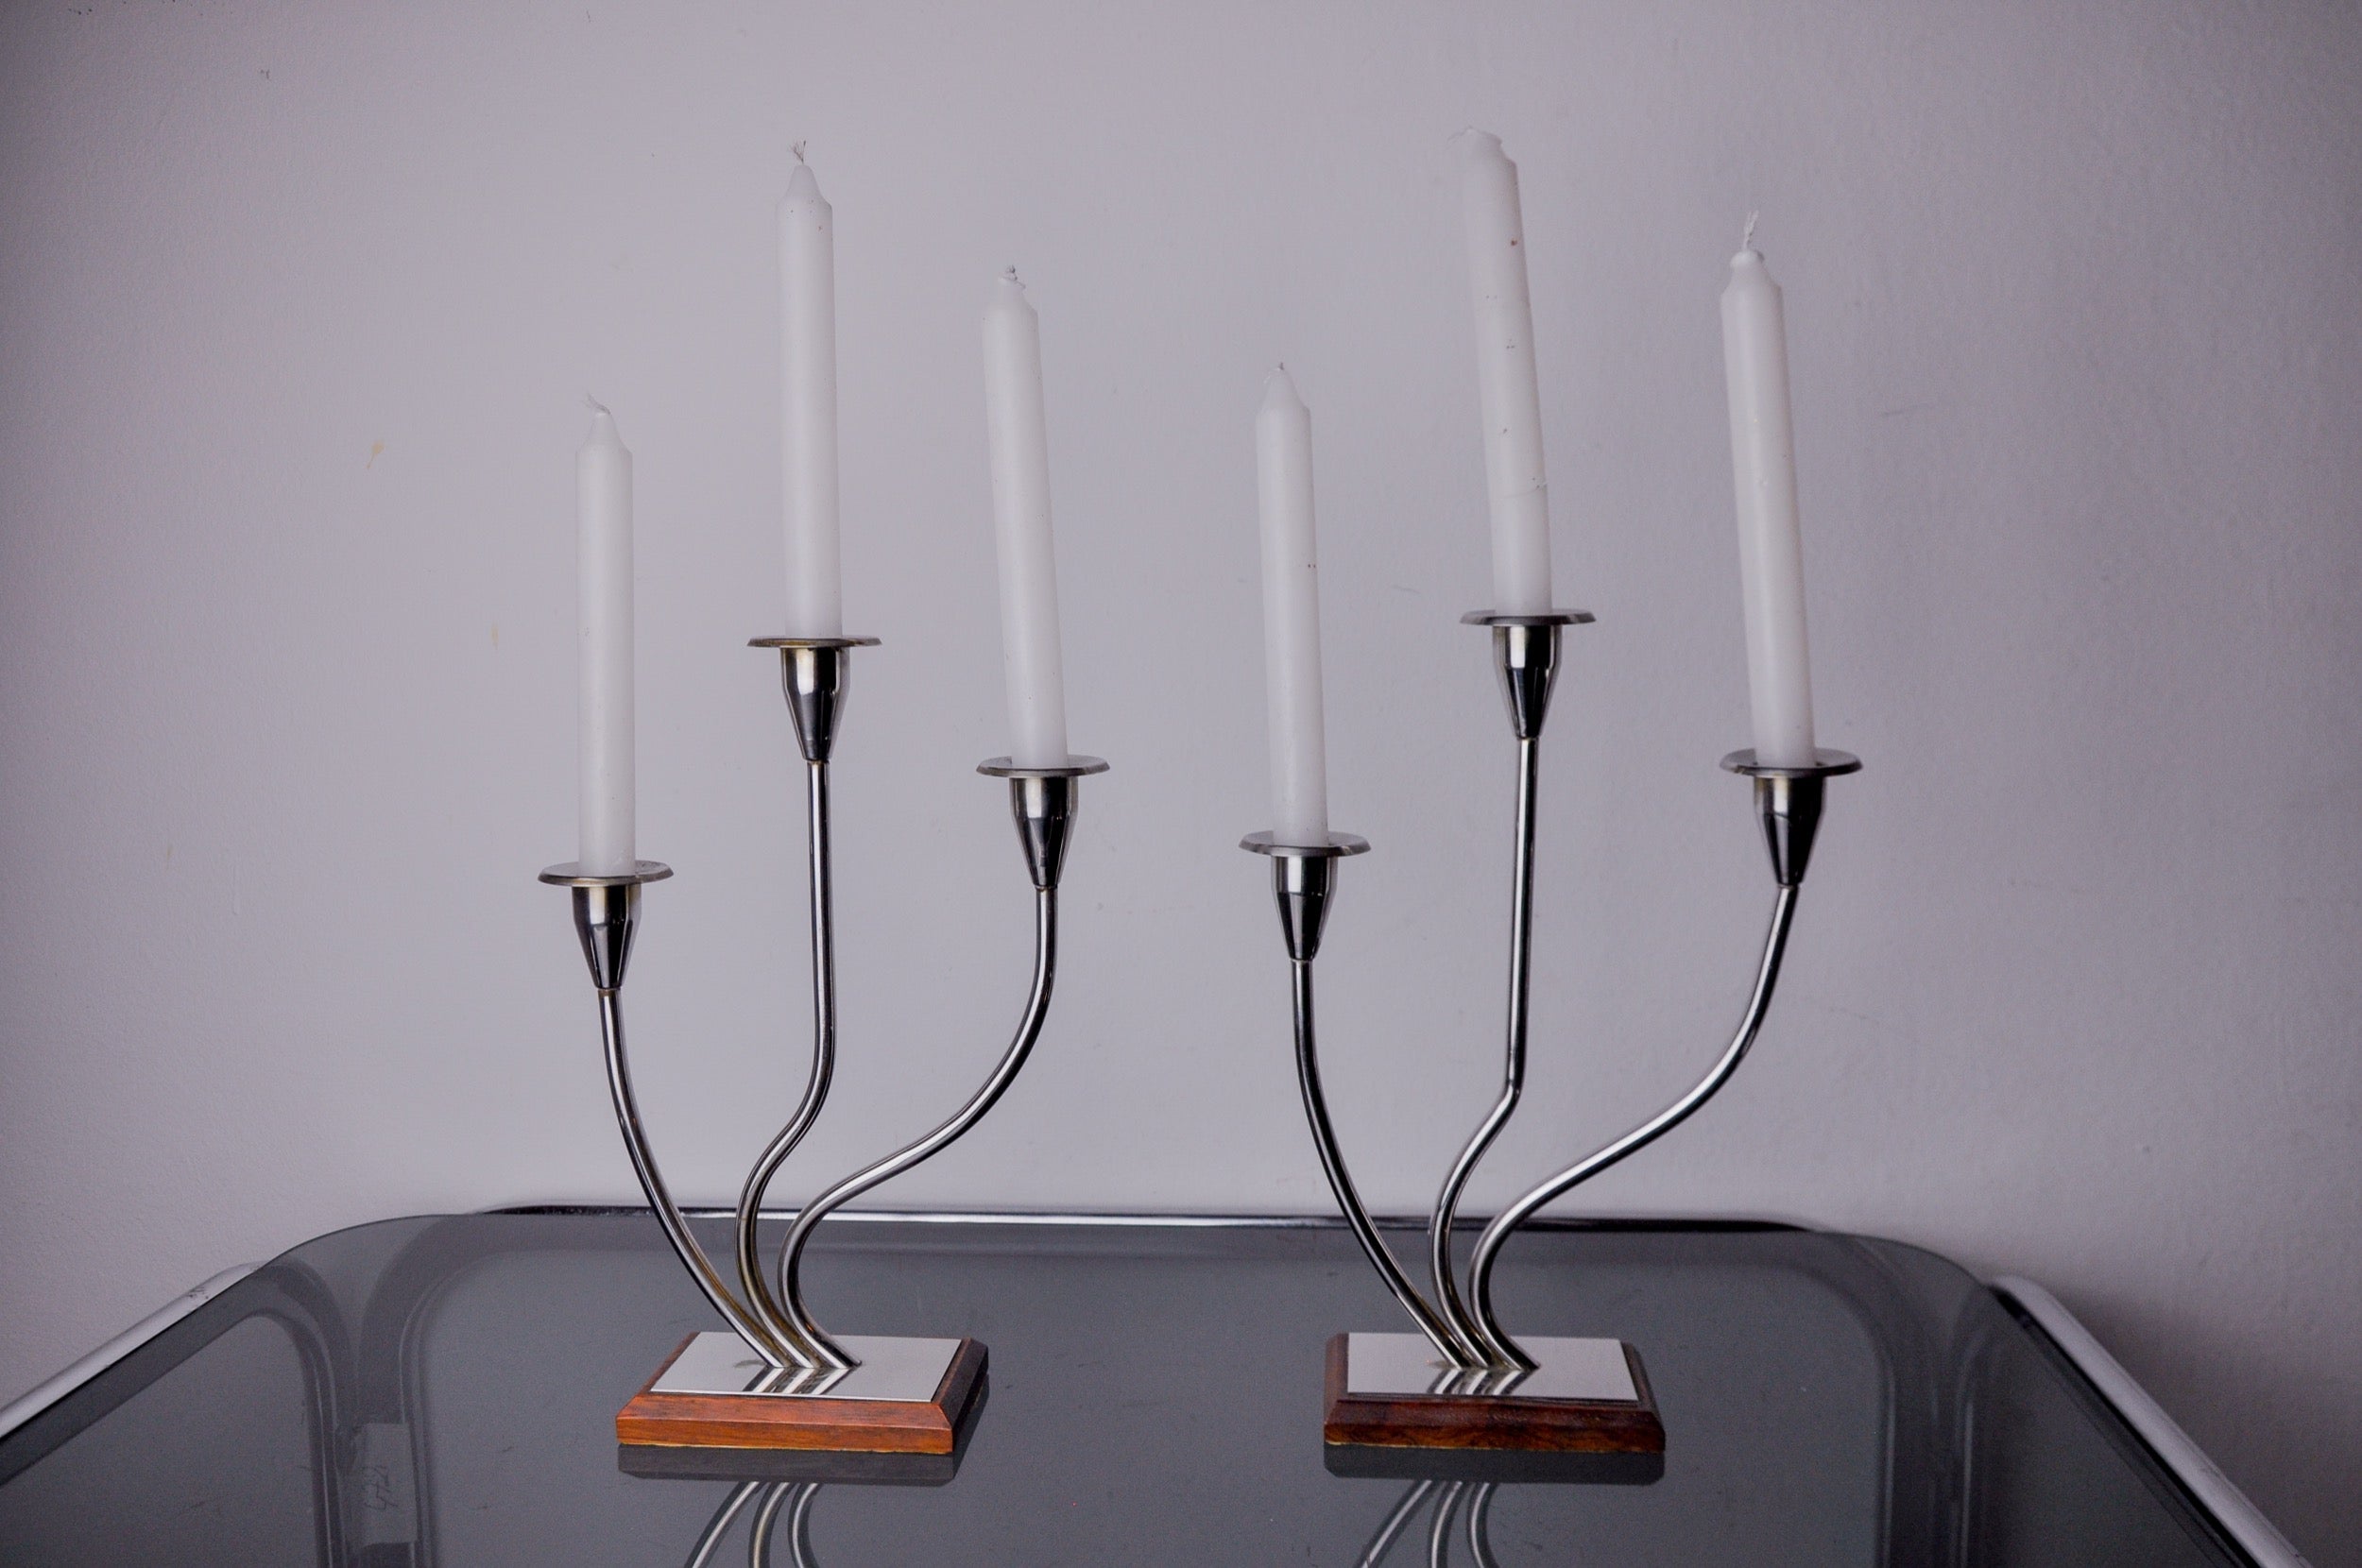 Very beautiful pair of art deco candlesticks in stainless steel and rosewood designed and produced in Spain in the 1970s. Structure in 18/8 stainless steel that can accommodate 3 candles. Superb designer object that will decorate your interior